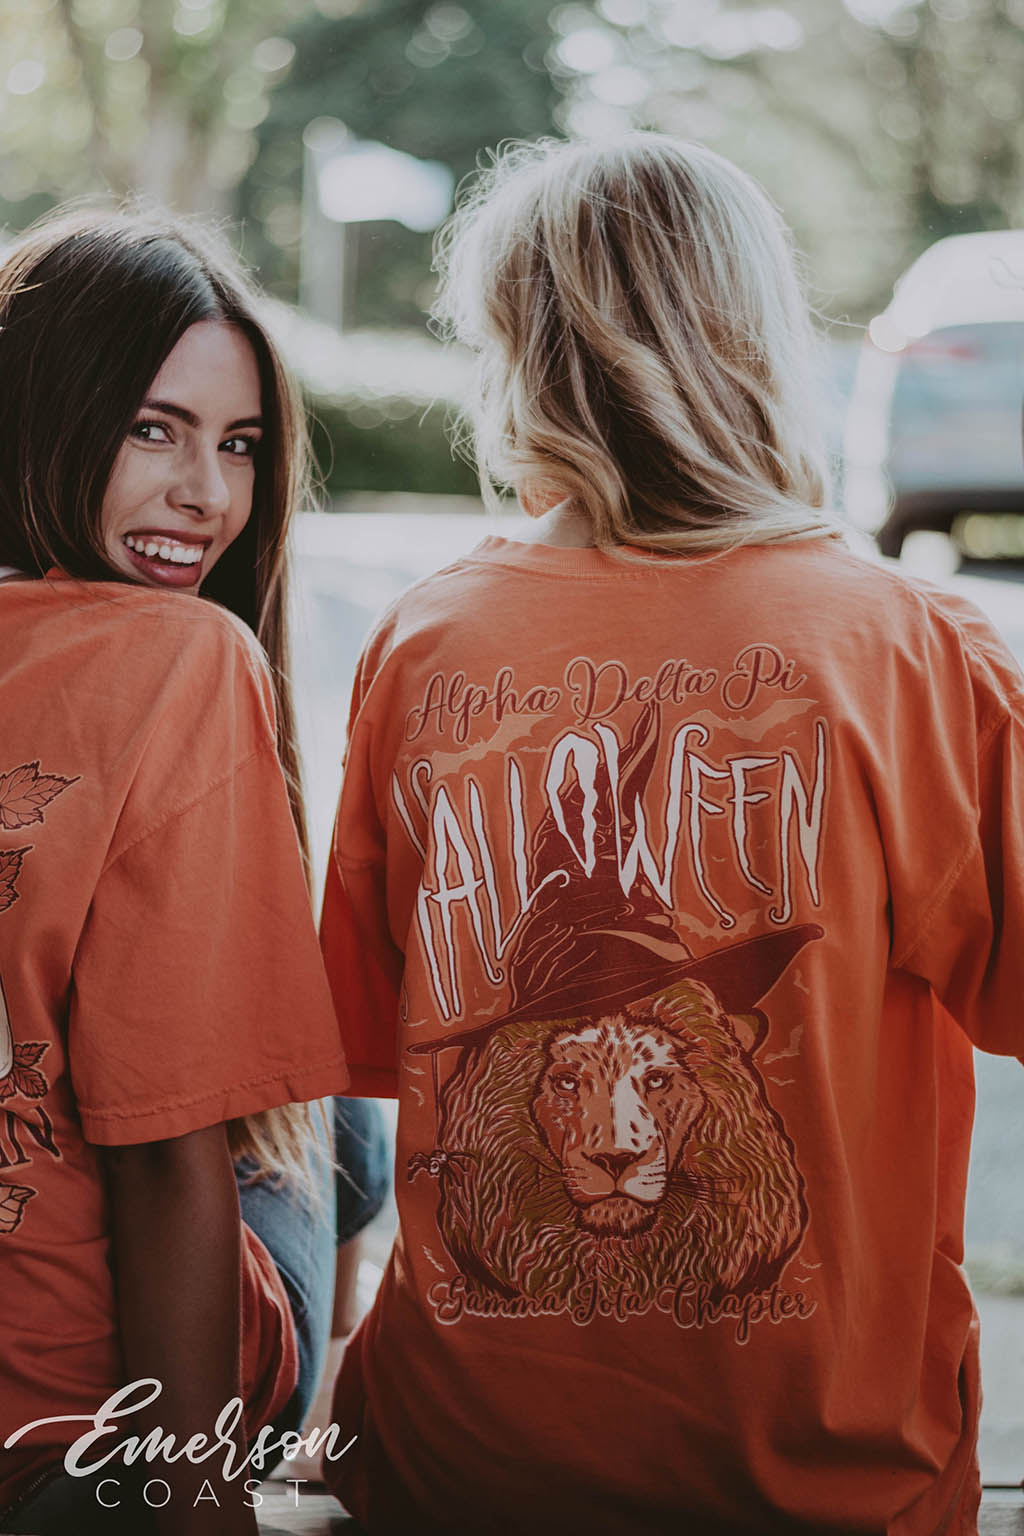 Girl wears orange ADPi Halloween Tshirt featuring a picture of a lion wearing a witch hat.